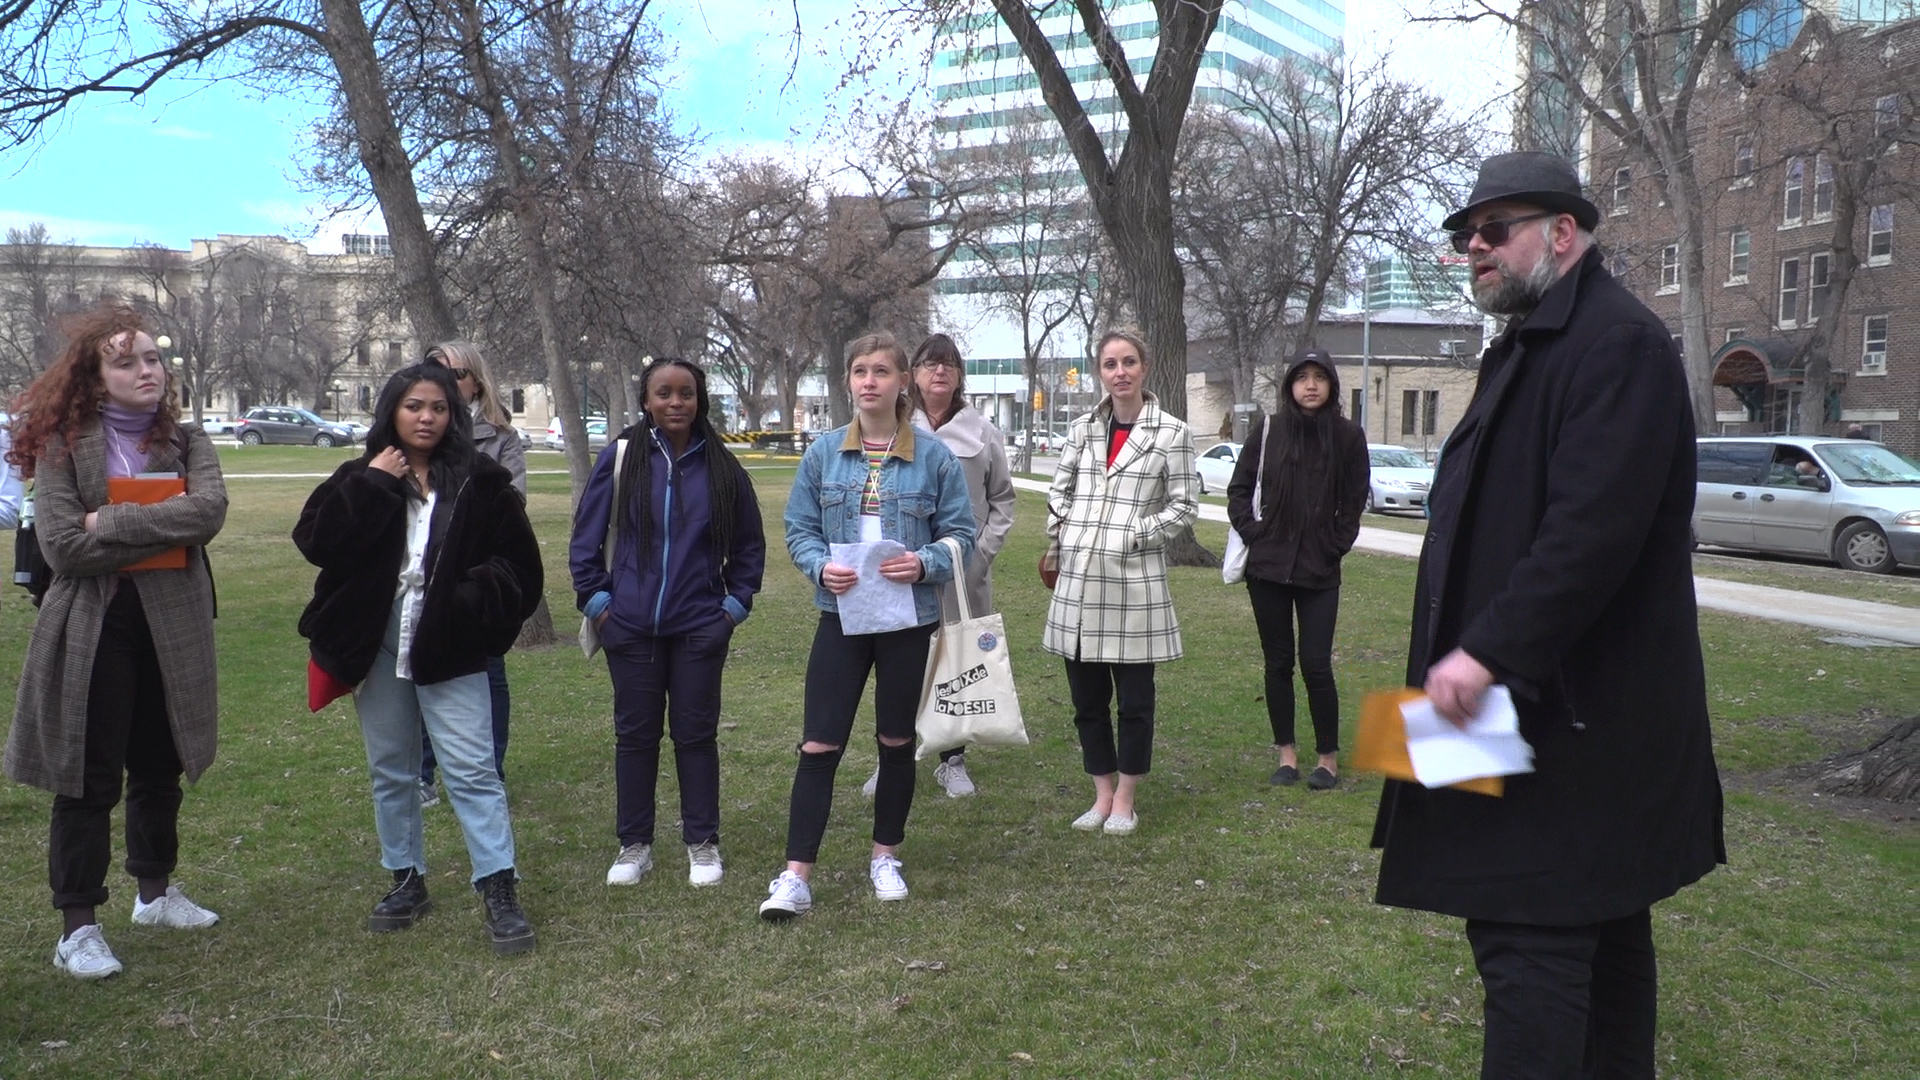 Kristian Enright discusses poetry and Winnipeg's Scottish heritage in front of the statue of poet Robert Burns at the Manitoba Legislative Building.